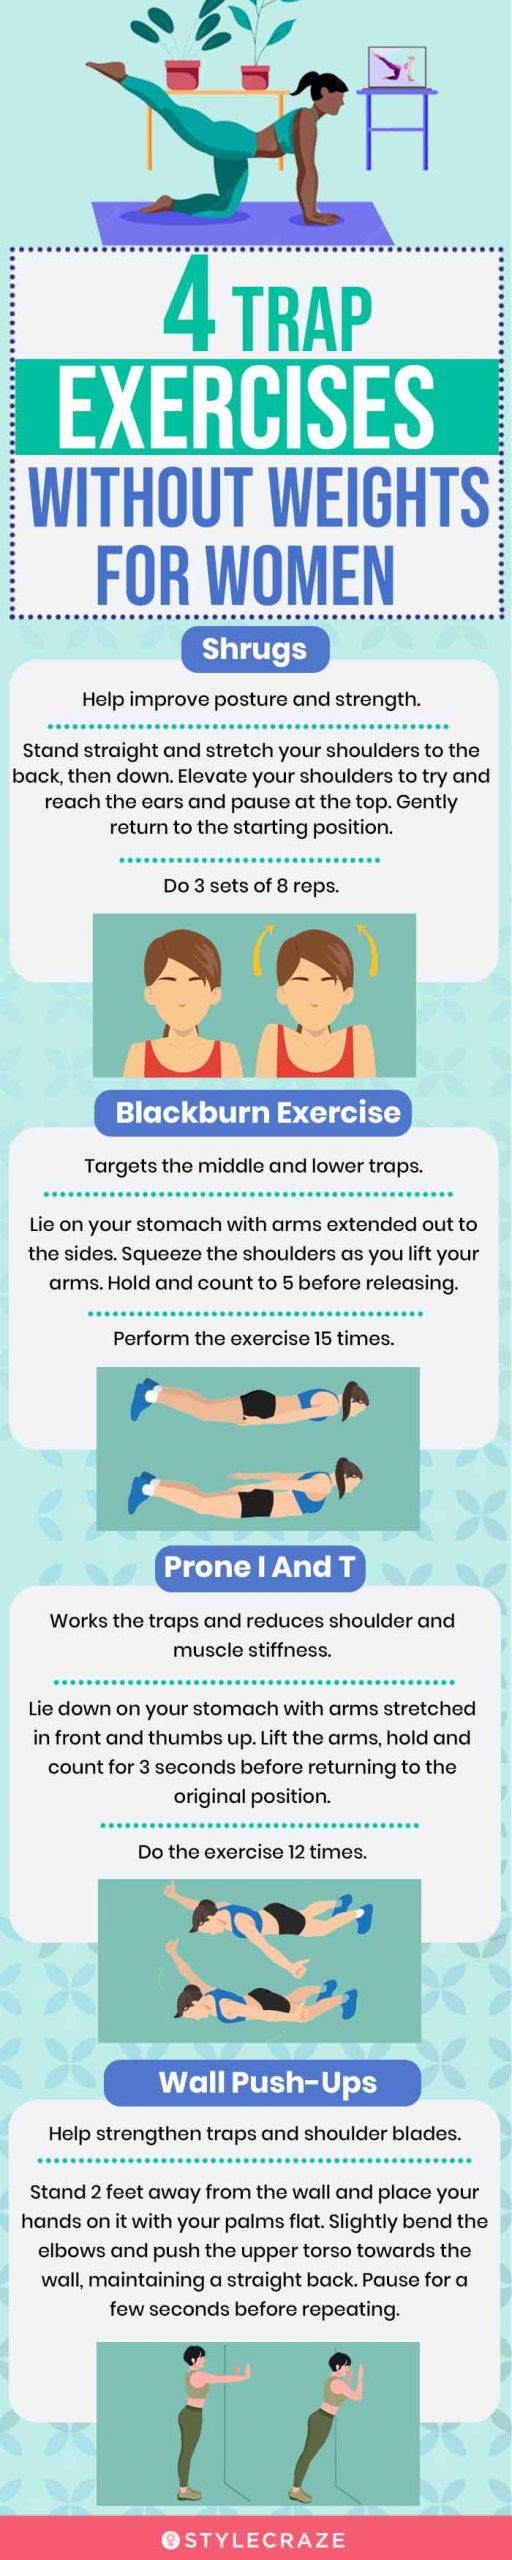 4 trap exercises without weights for women (infographic)